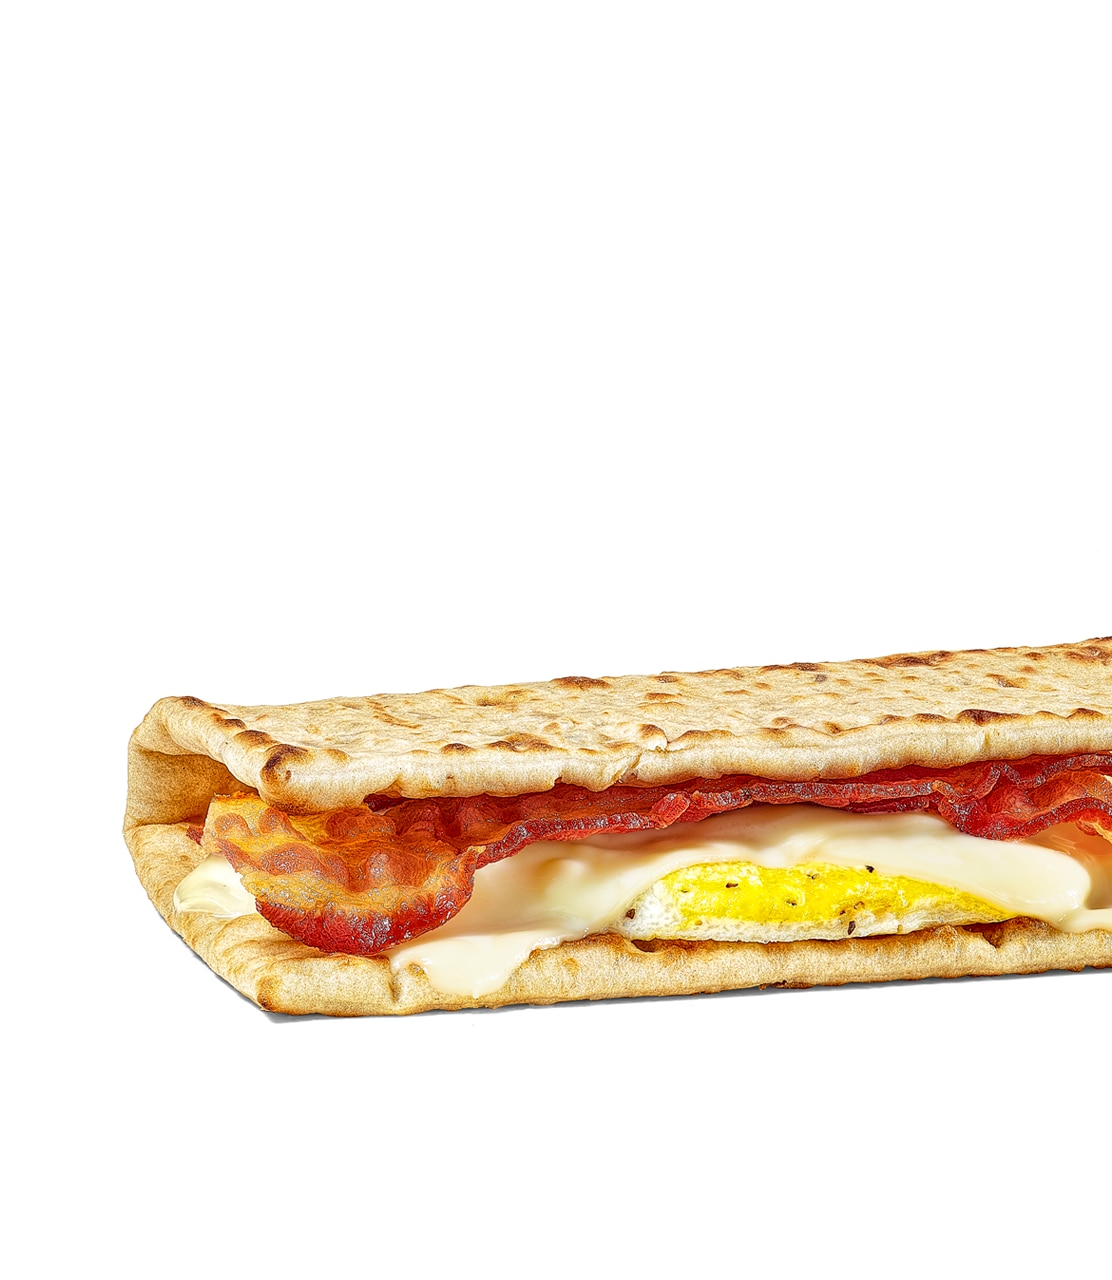 Calories in Subway Bacon, Egg & Cheese Flatbread Omelet on six inch Flatbread